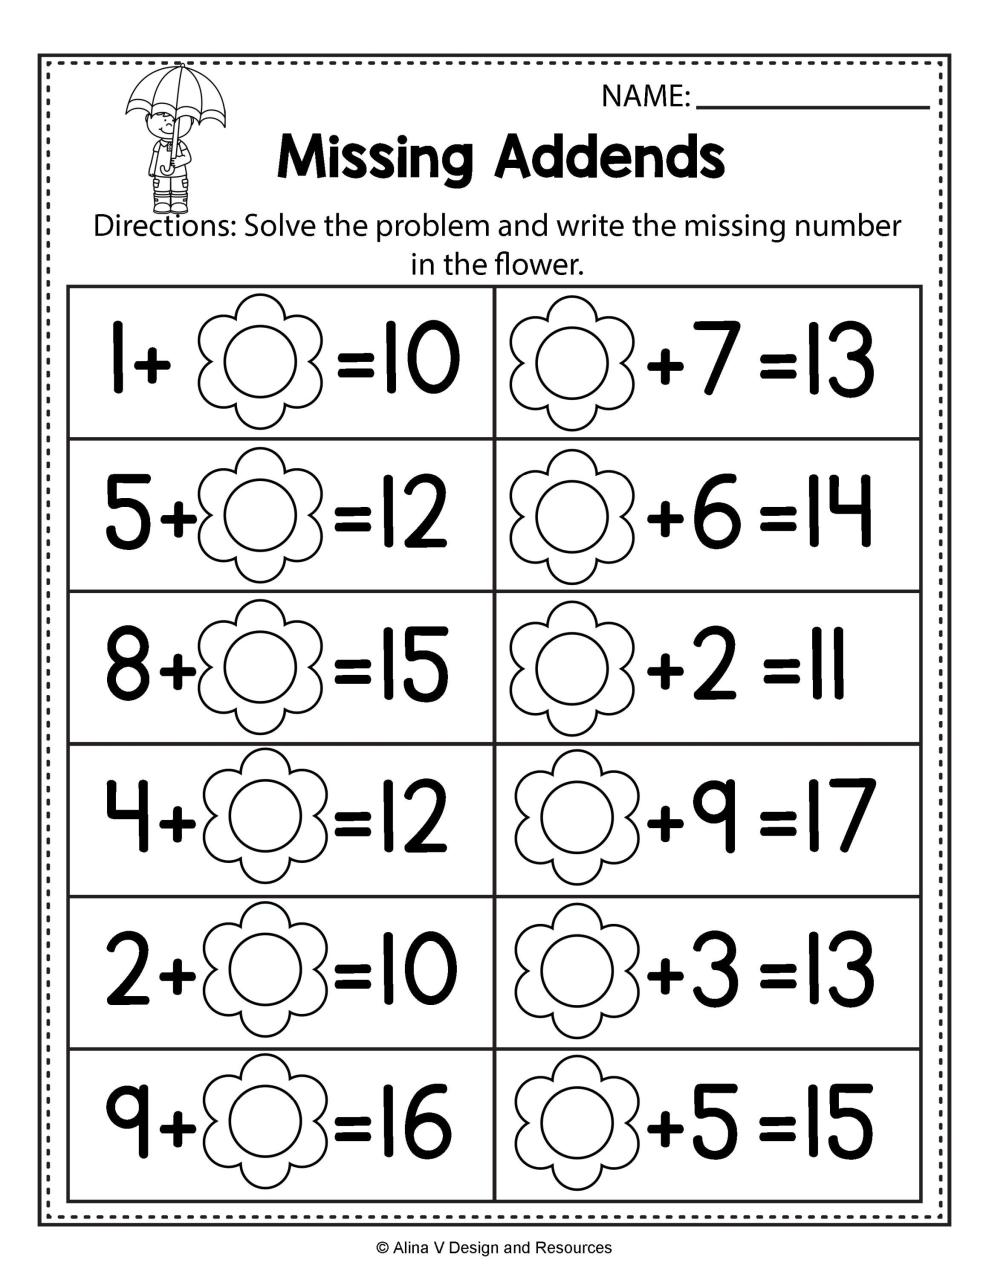 17 Best 1st Grade Math Worksheets For Fun Times images on Best